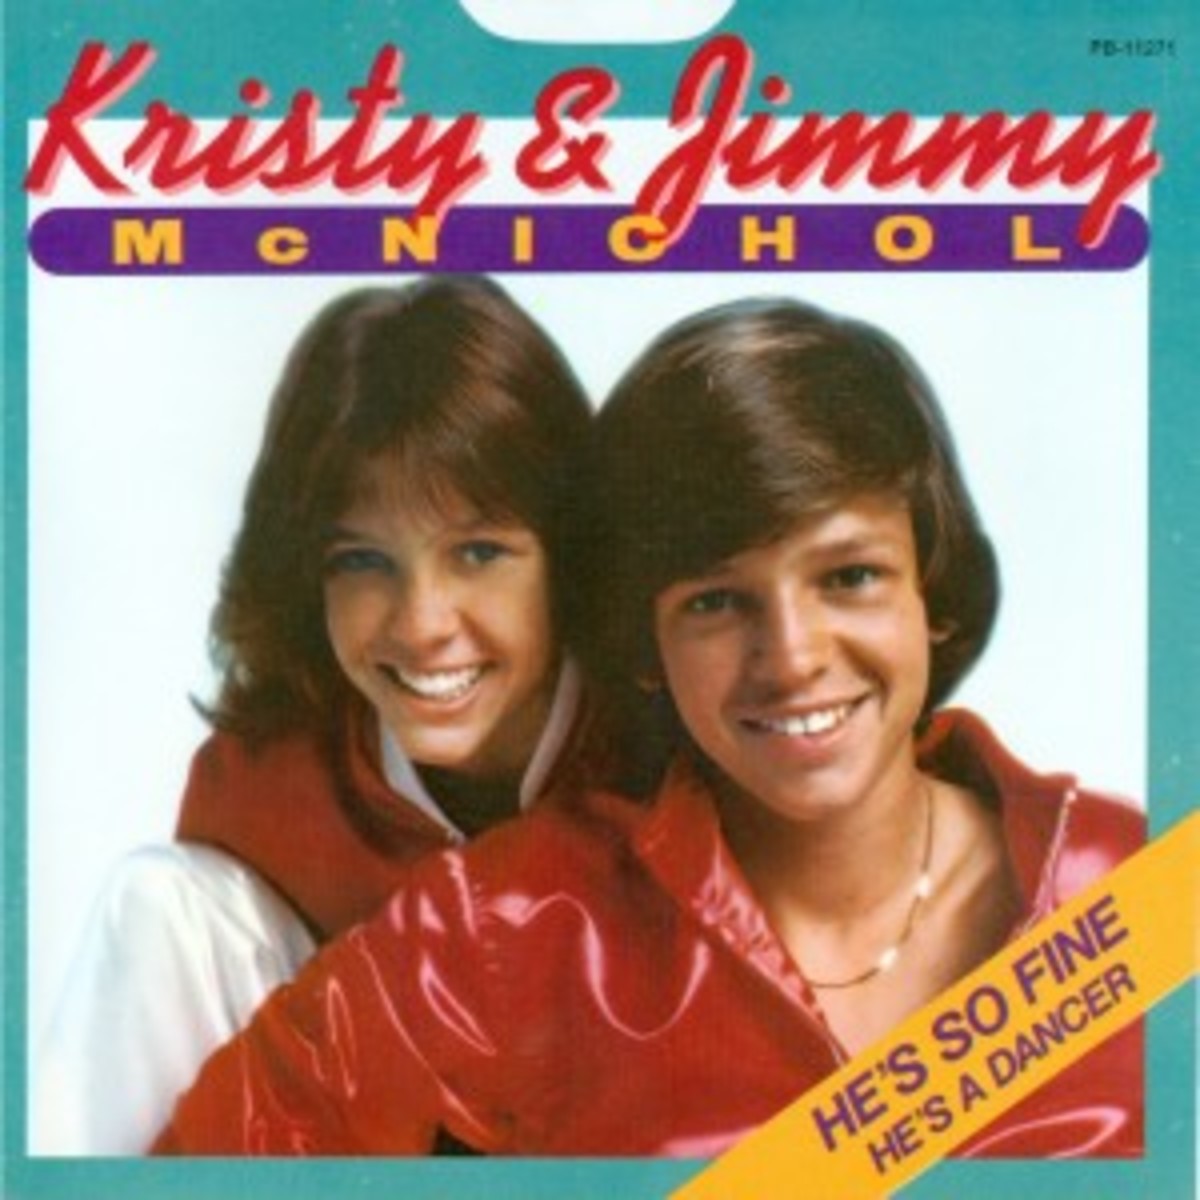 Kristy and Jimmy McNichol He's So Fine picture sleeve